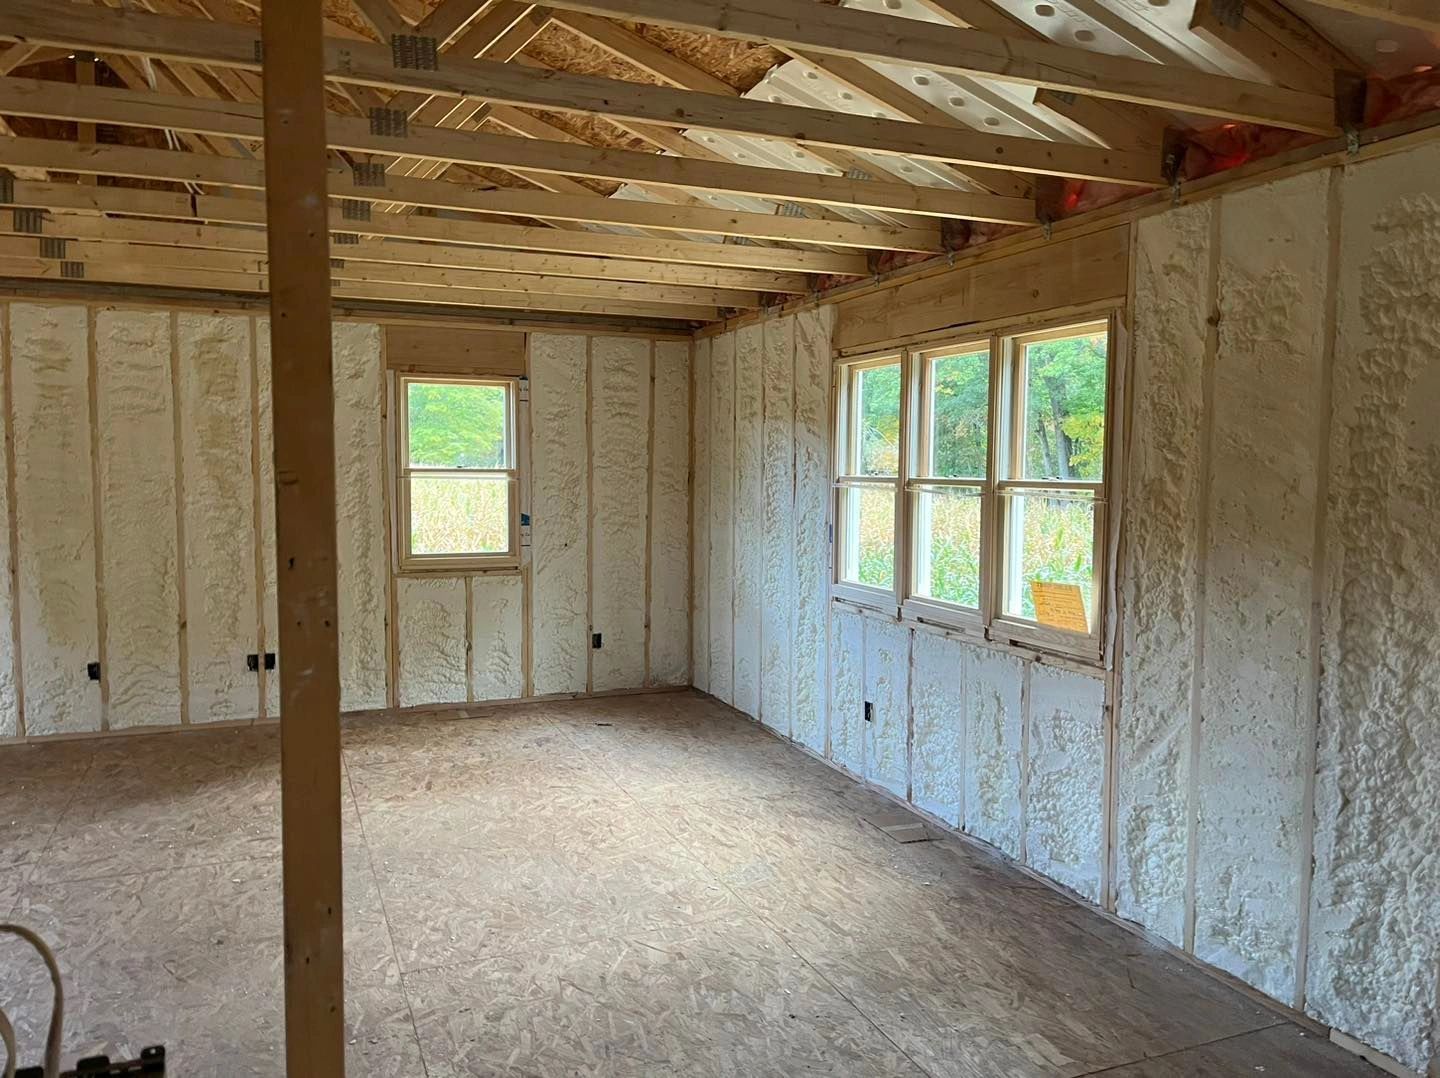 Spray Foam Insulation Contractor in Kalamazoo, Michigan. Residential and Commercial Insulation work.